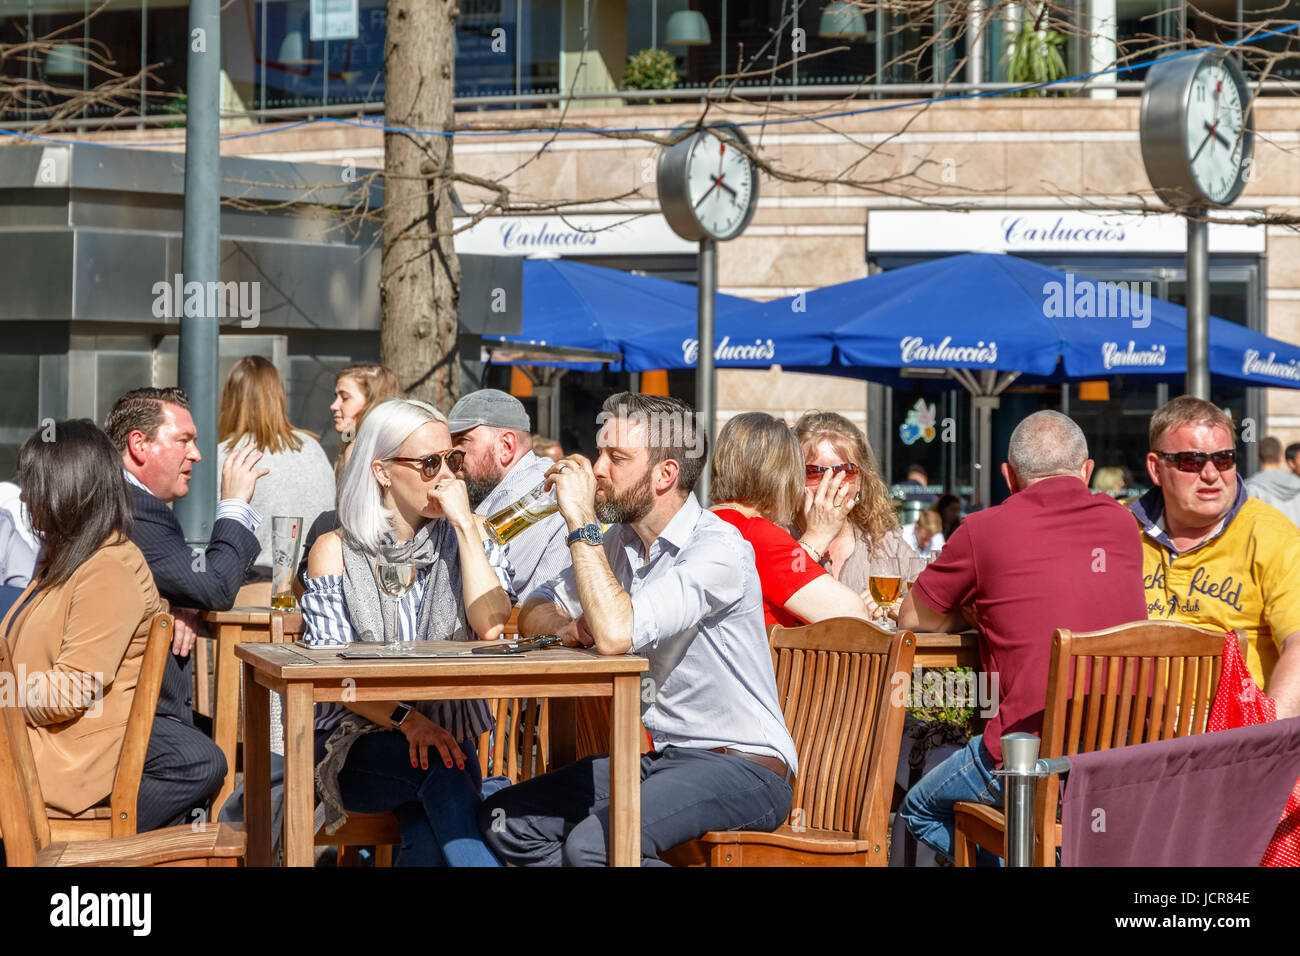 London, UK - May 10, 2017 - Reuters Plaza in Canary Wharf packed with people drinking on a sunny day Stock Photo